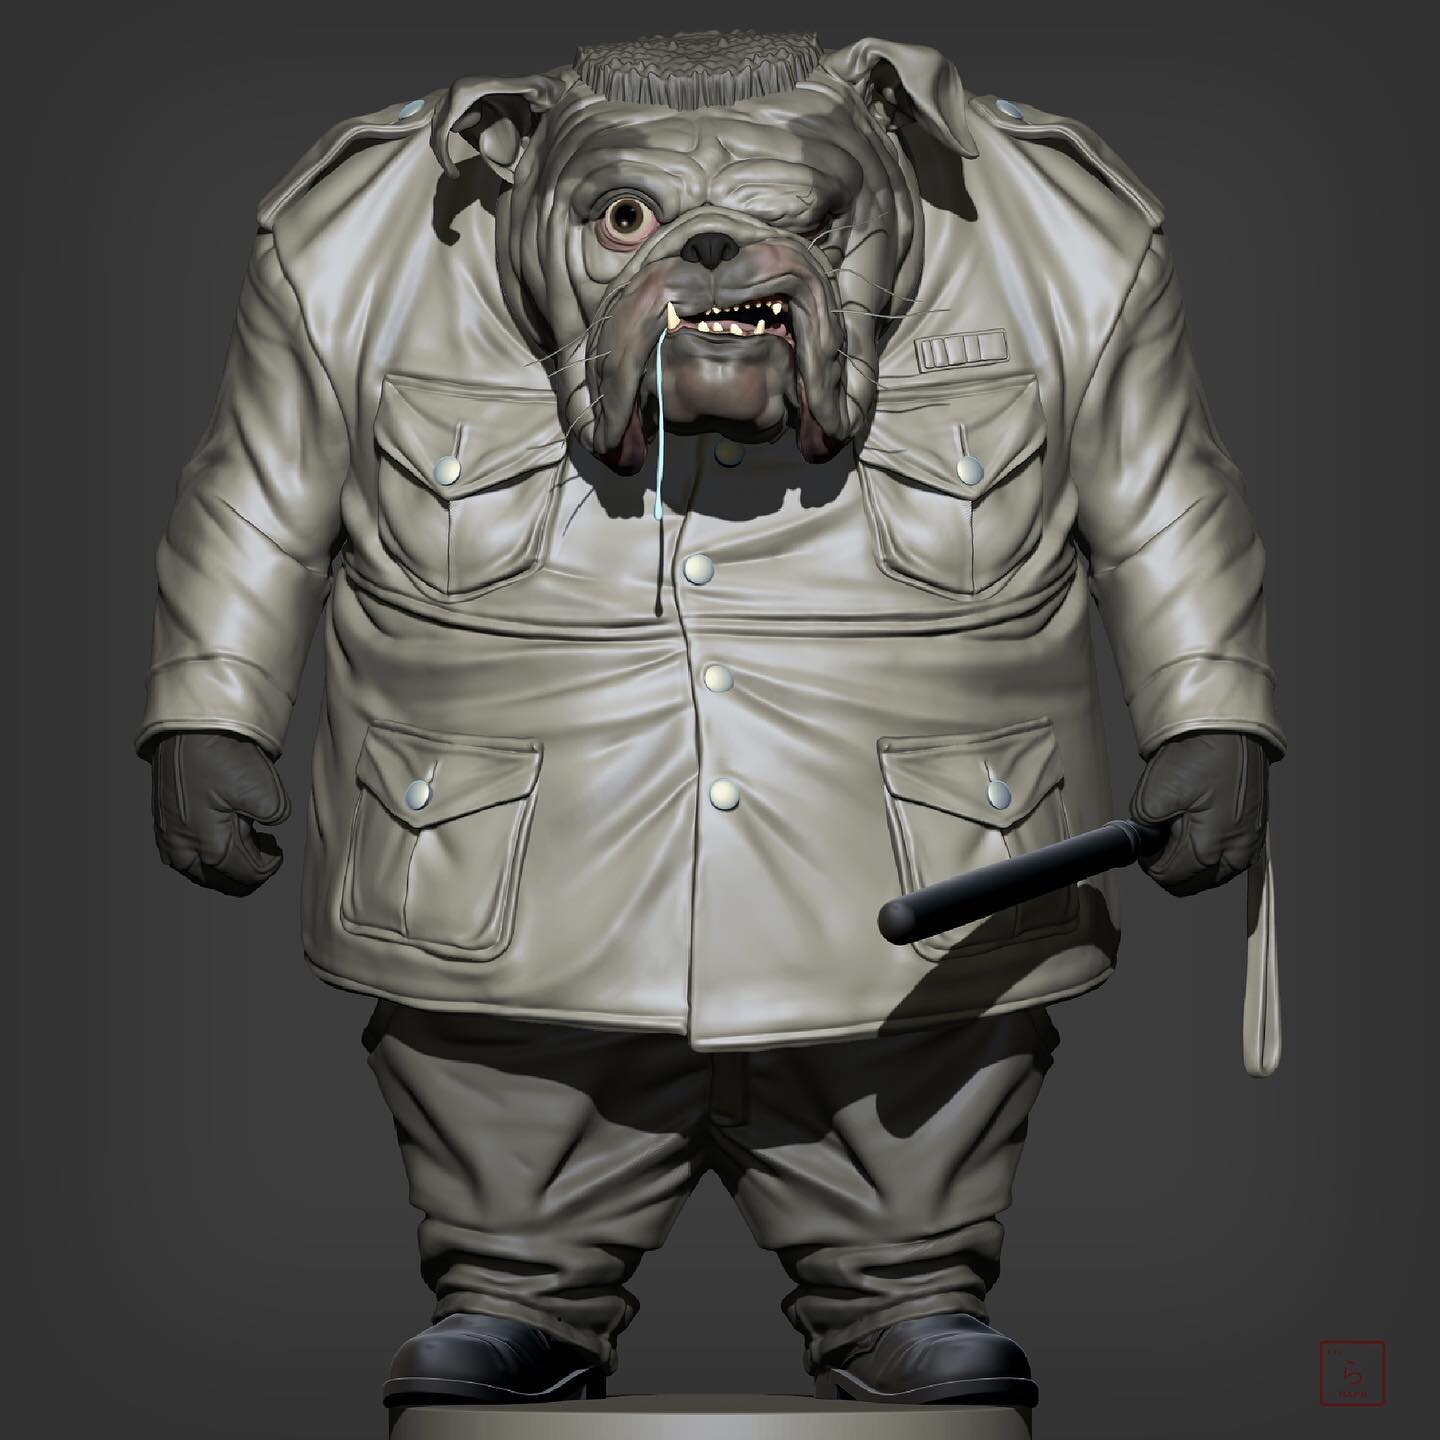 The guard might be wondering&hellip;.

&lsquo;Who let the dogs out?&rsquo; 

You can find me at the laugh factory, Wednesdays at 11 am, bombing. 

#zbrush #conceptart